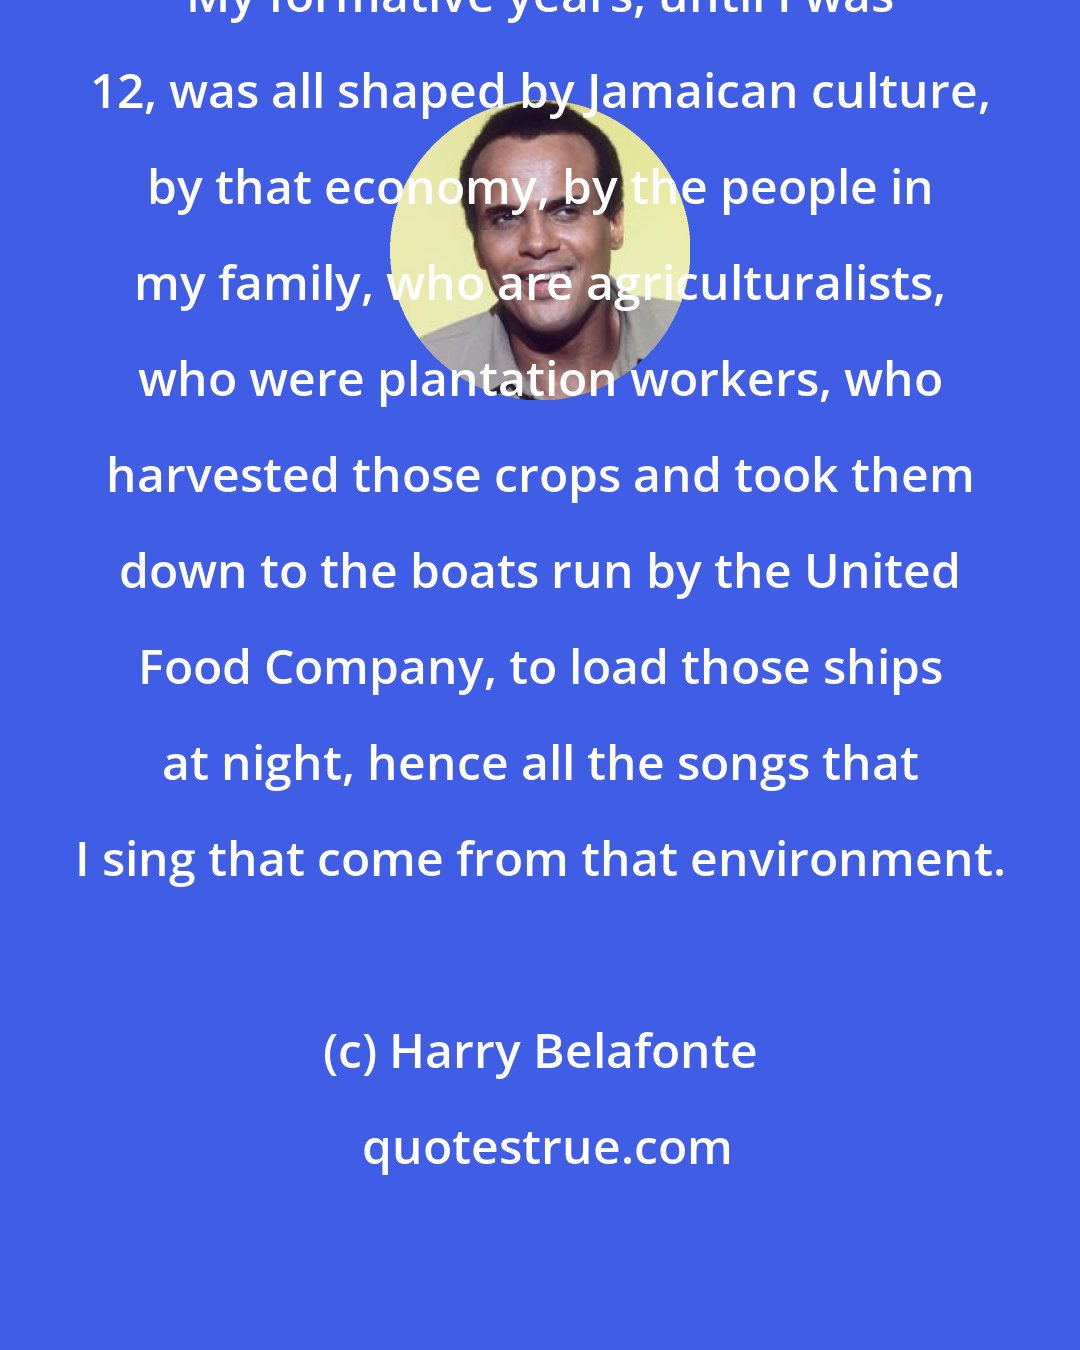 Harry Belafonte: My formative years, until I was 12, was all shaped by Jamaican culture, by that economy, by the people in my family, who are agriculturalists, who were plantation workers, who harvested those crops and took them down to the boats run by the United Food Company, to load those ships at night, hence all the songs that I sing that come from that environment.